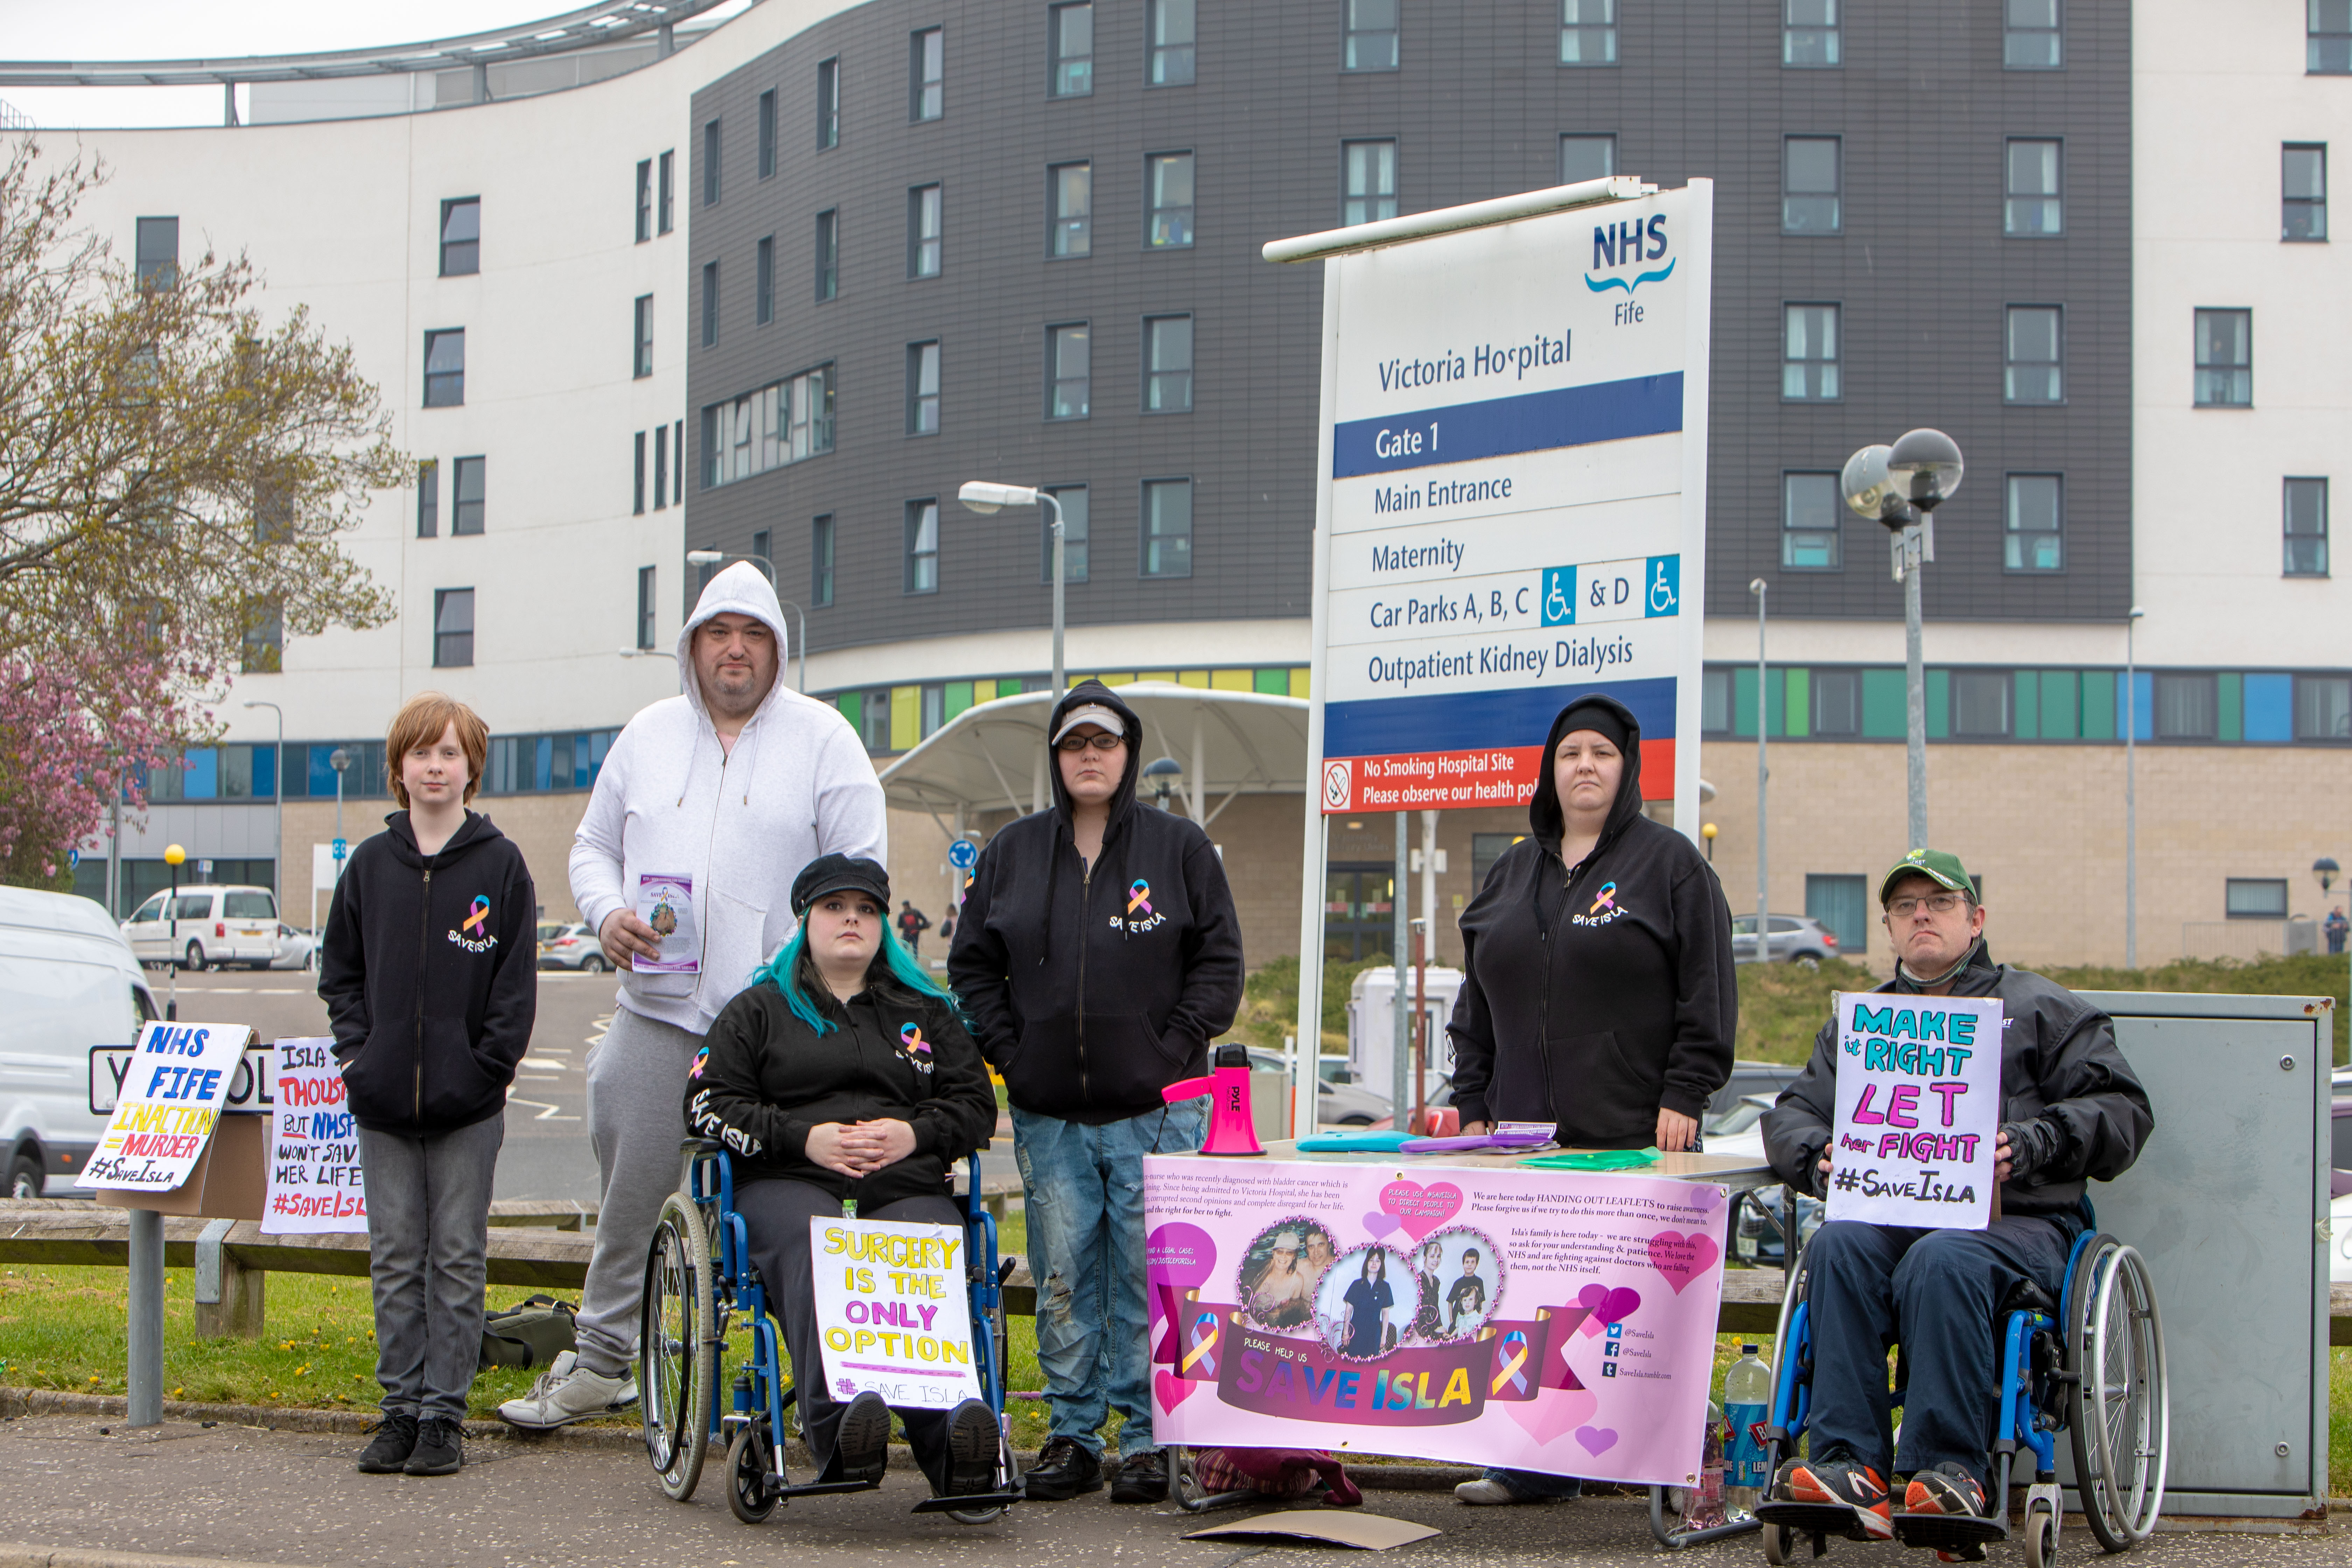 Family of Isabella Keatings protest against her discharge from Victoria Hospital. From left, Damien Keatings, 12, Thomas Trowell, 35, Kirstie Keatings, 30, Heather Bishop, 32, Lisha Keatings, 27, and Chris Macdonald, 47.